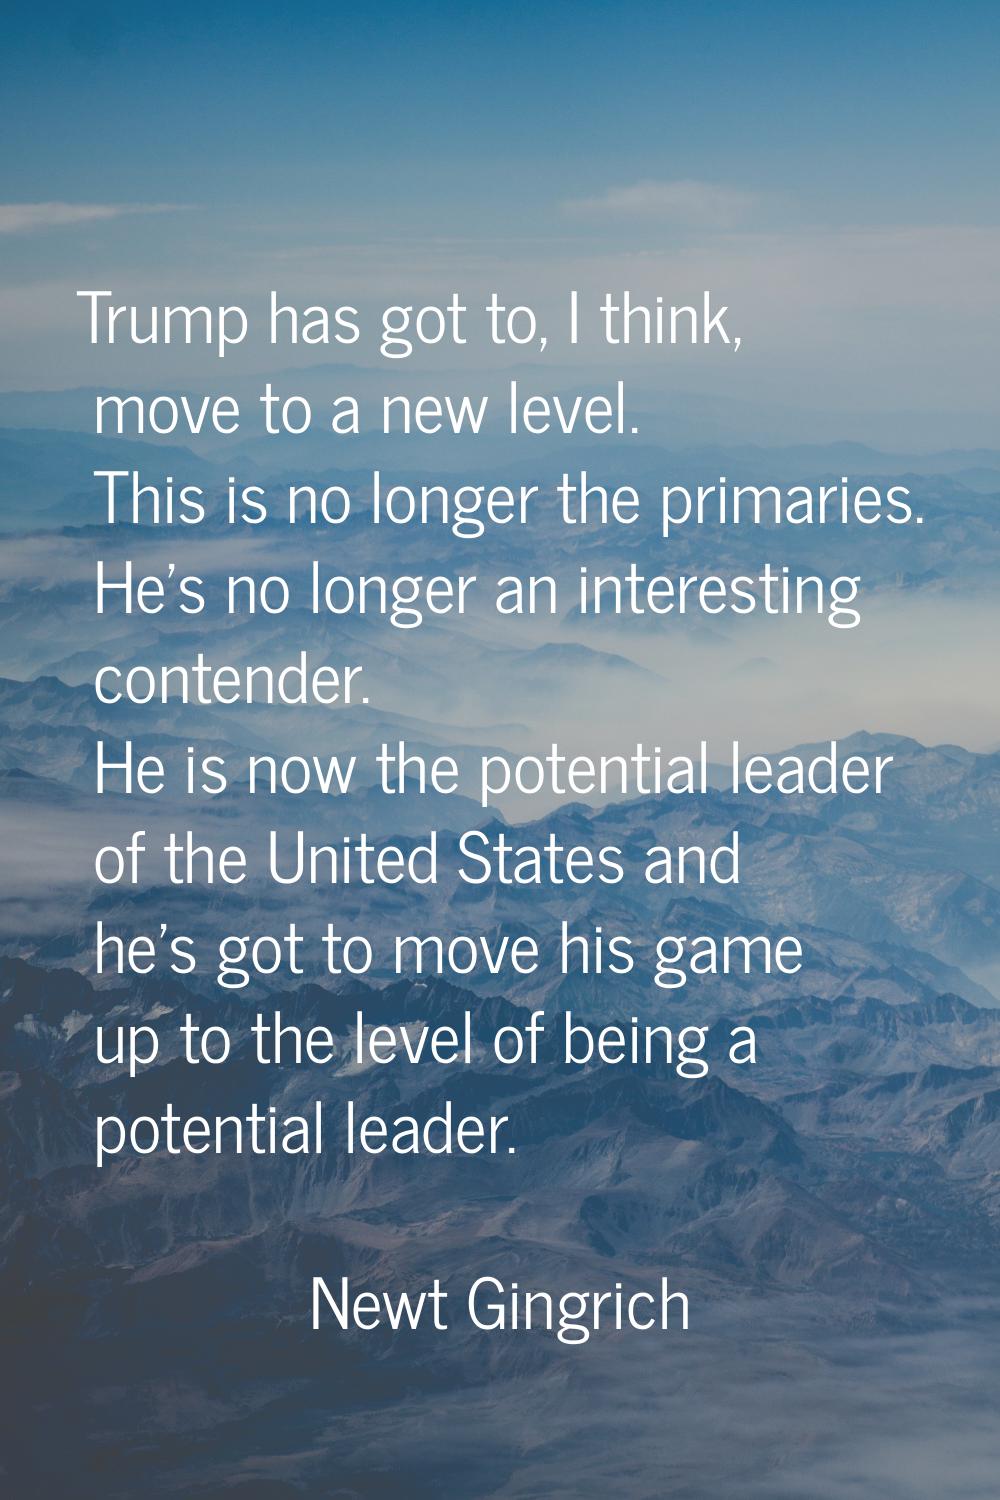 Trump has got to, I think, move to a new level. This is no longer the primaries. He's no longer an 